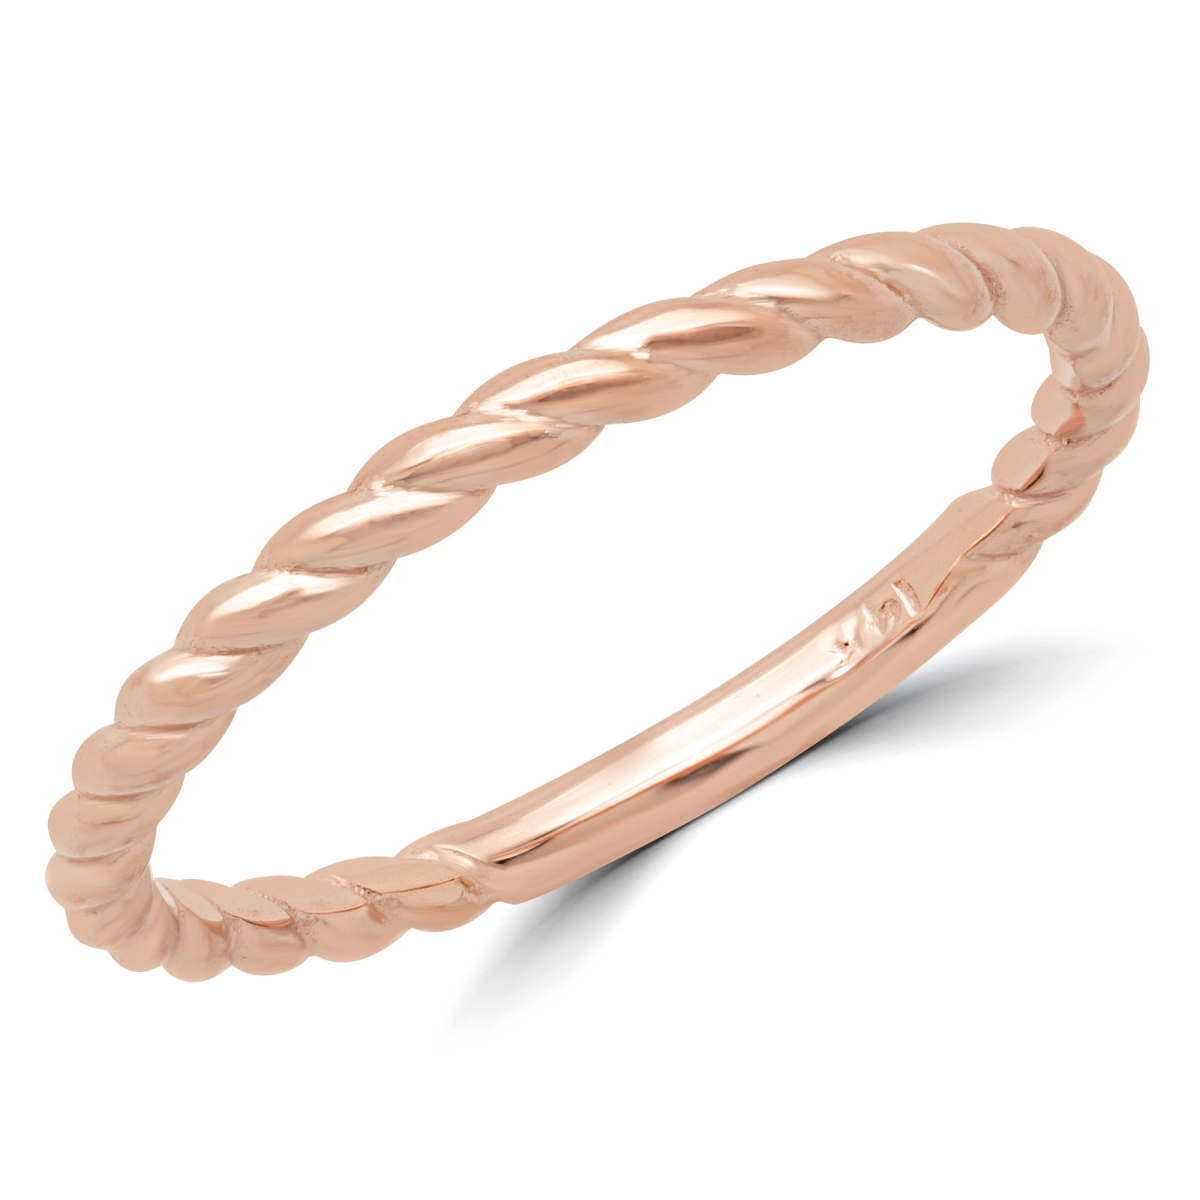 Picture of Majesty Diamonds MD180603-4.75 Braided Rope Classic Wedding Band Ring in 14K Rose Gold - Size 4.75